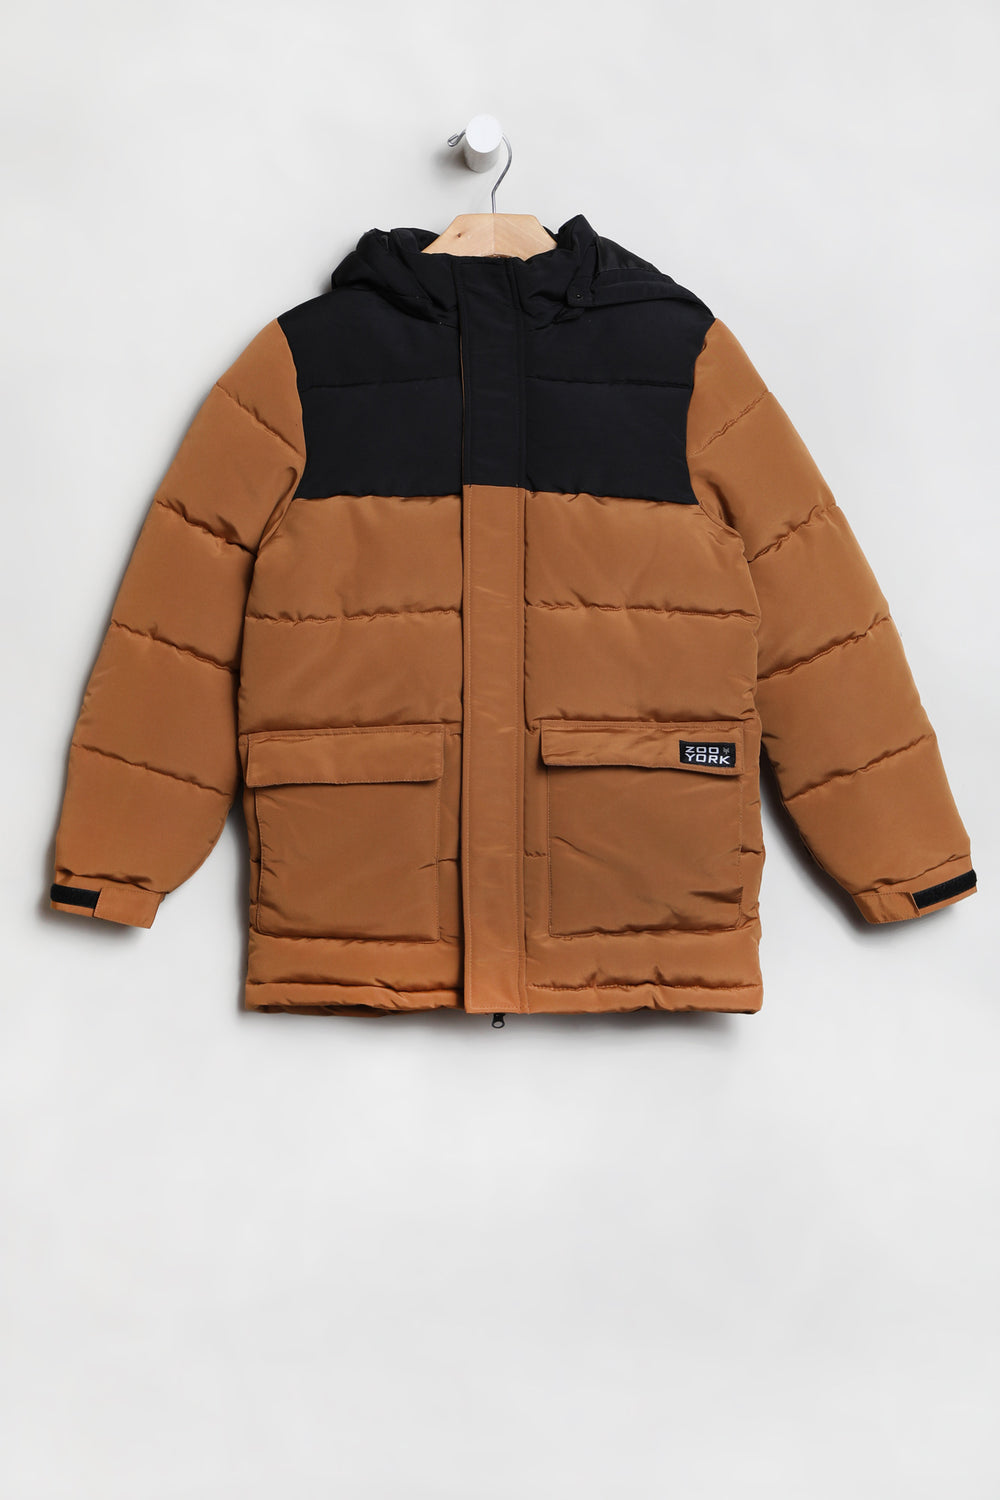 Zoo York Youth Colour Block Puffer Jacket Zoo York Youth Colour Block Puffer Jacket